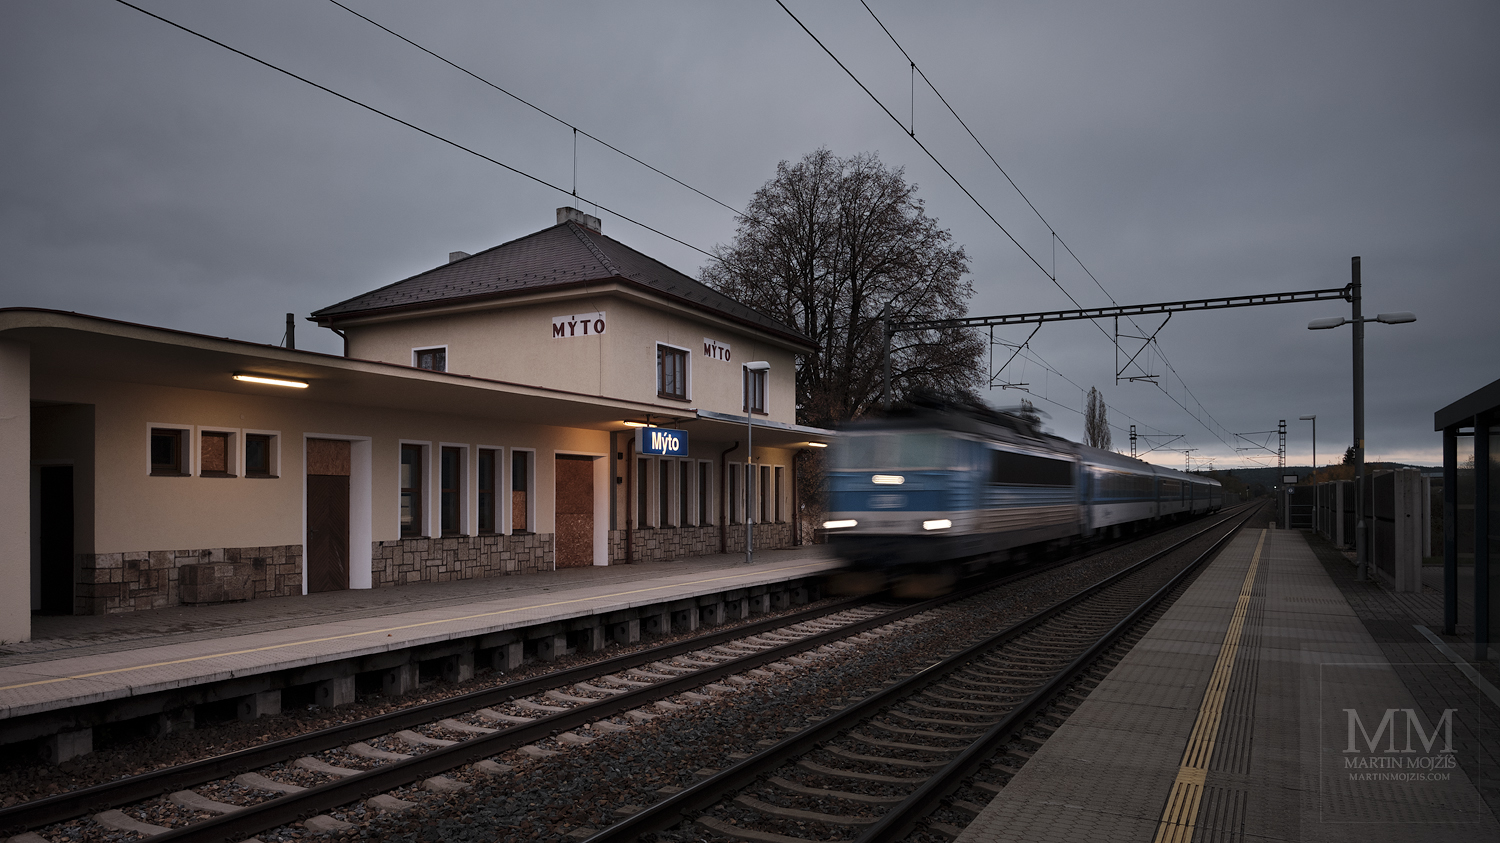 Photographic report from railway station Myto by Martin Mojzis.